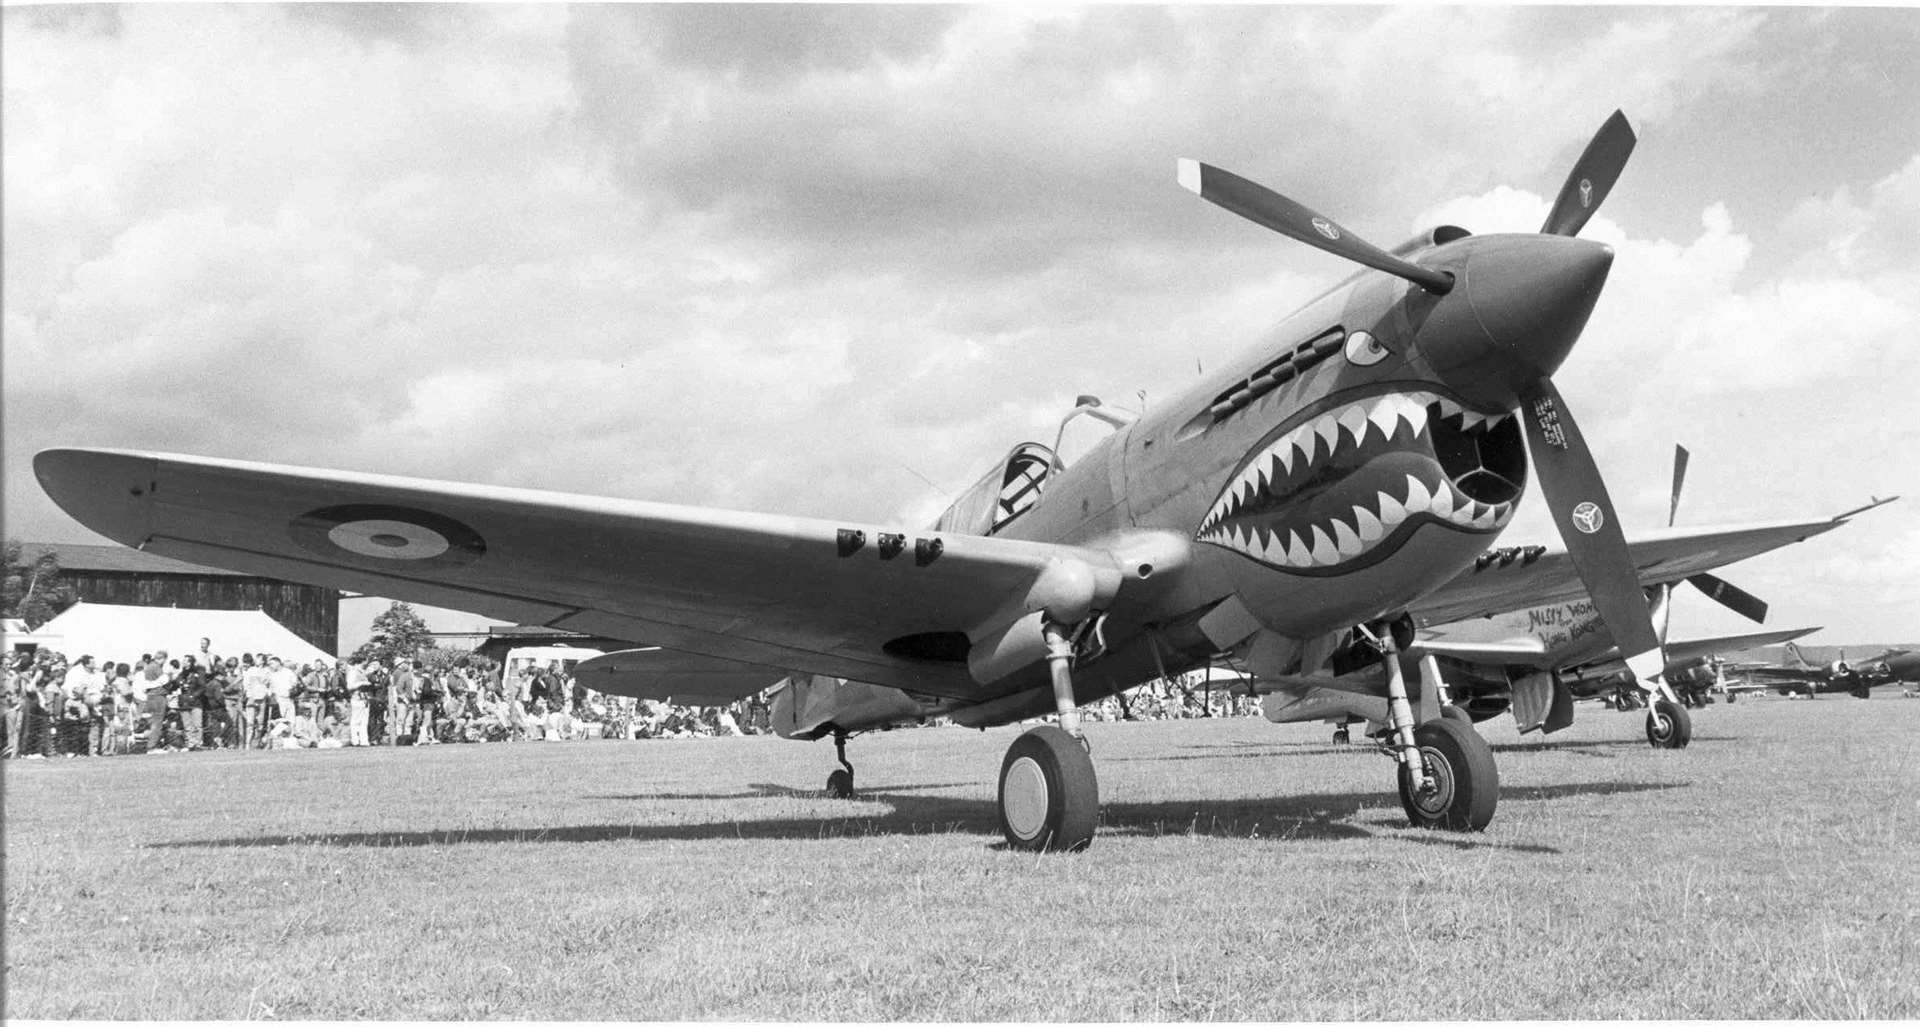 P 40 Kittyhawk on display at the Great Warbirds Airshow, West Malling, Kent. 1988